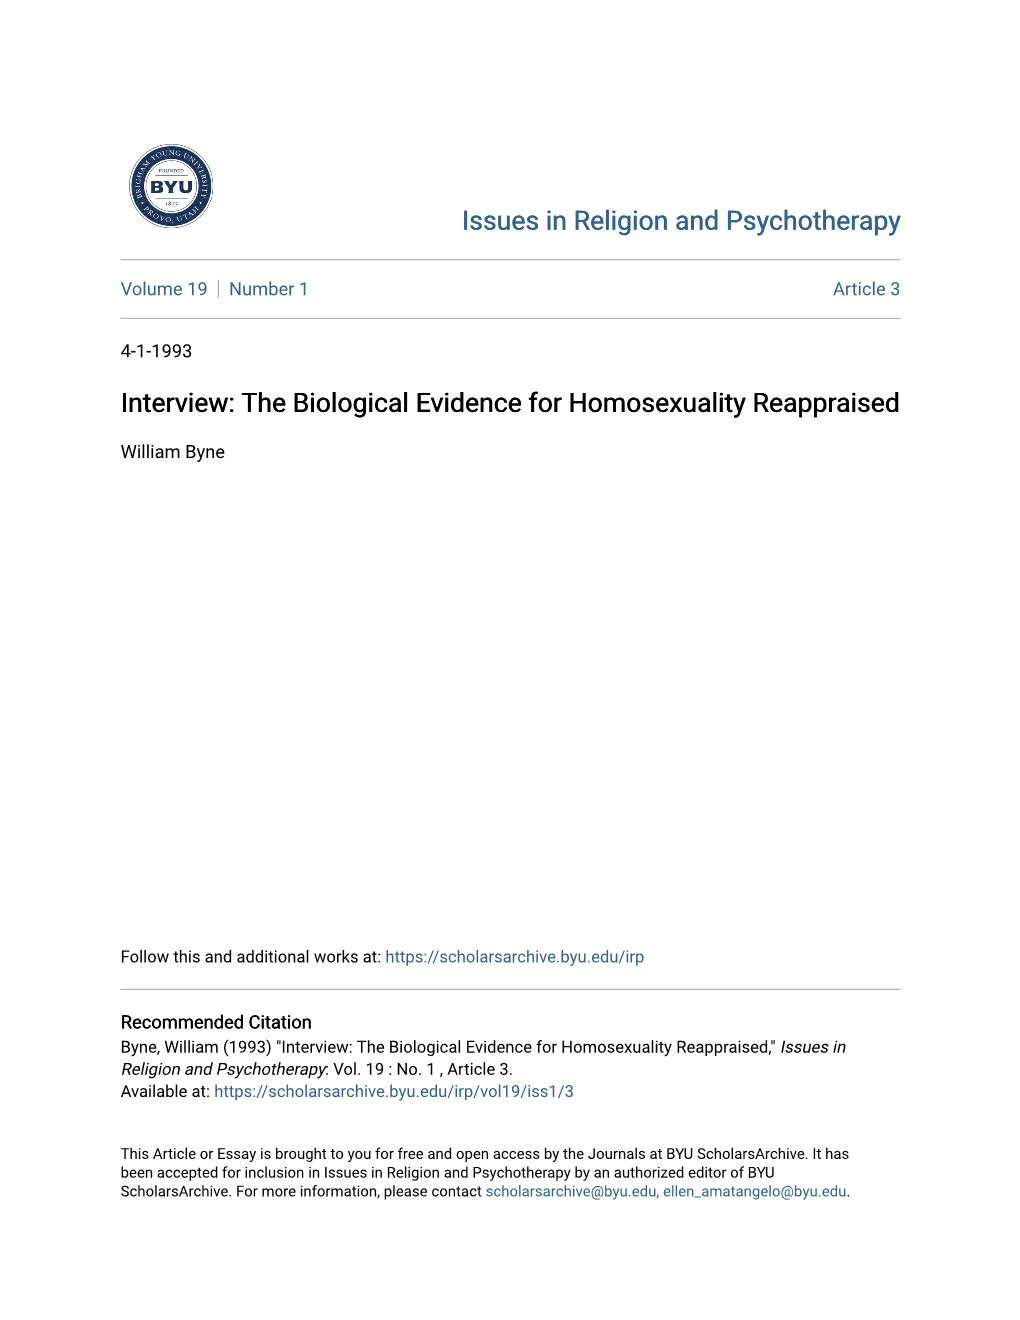 Interview: the Biological Evidence for Homosexuality Reappraised